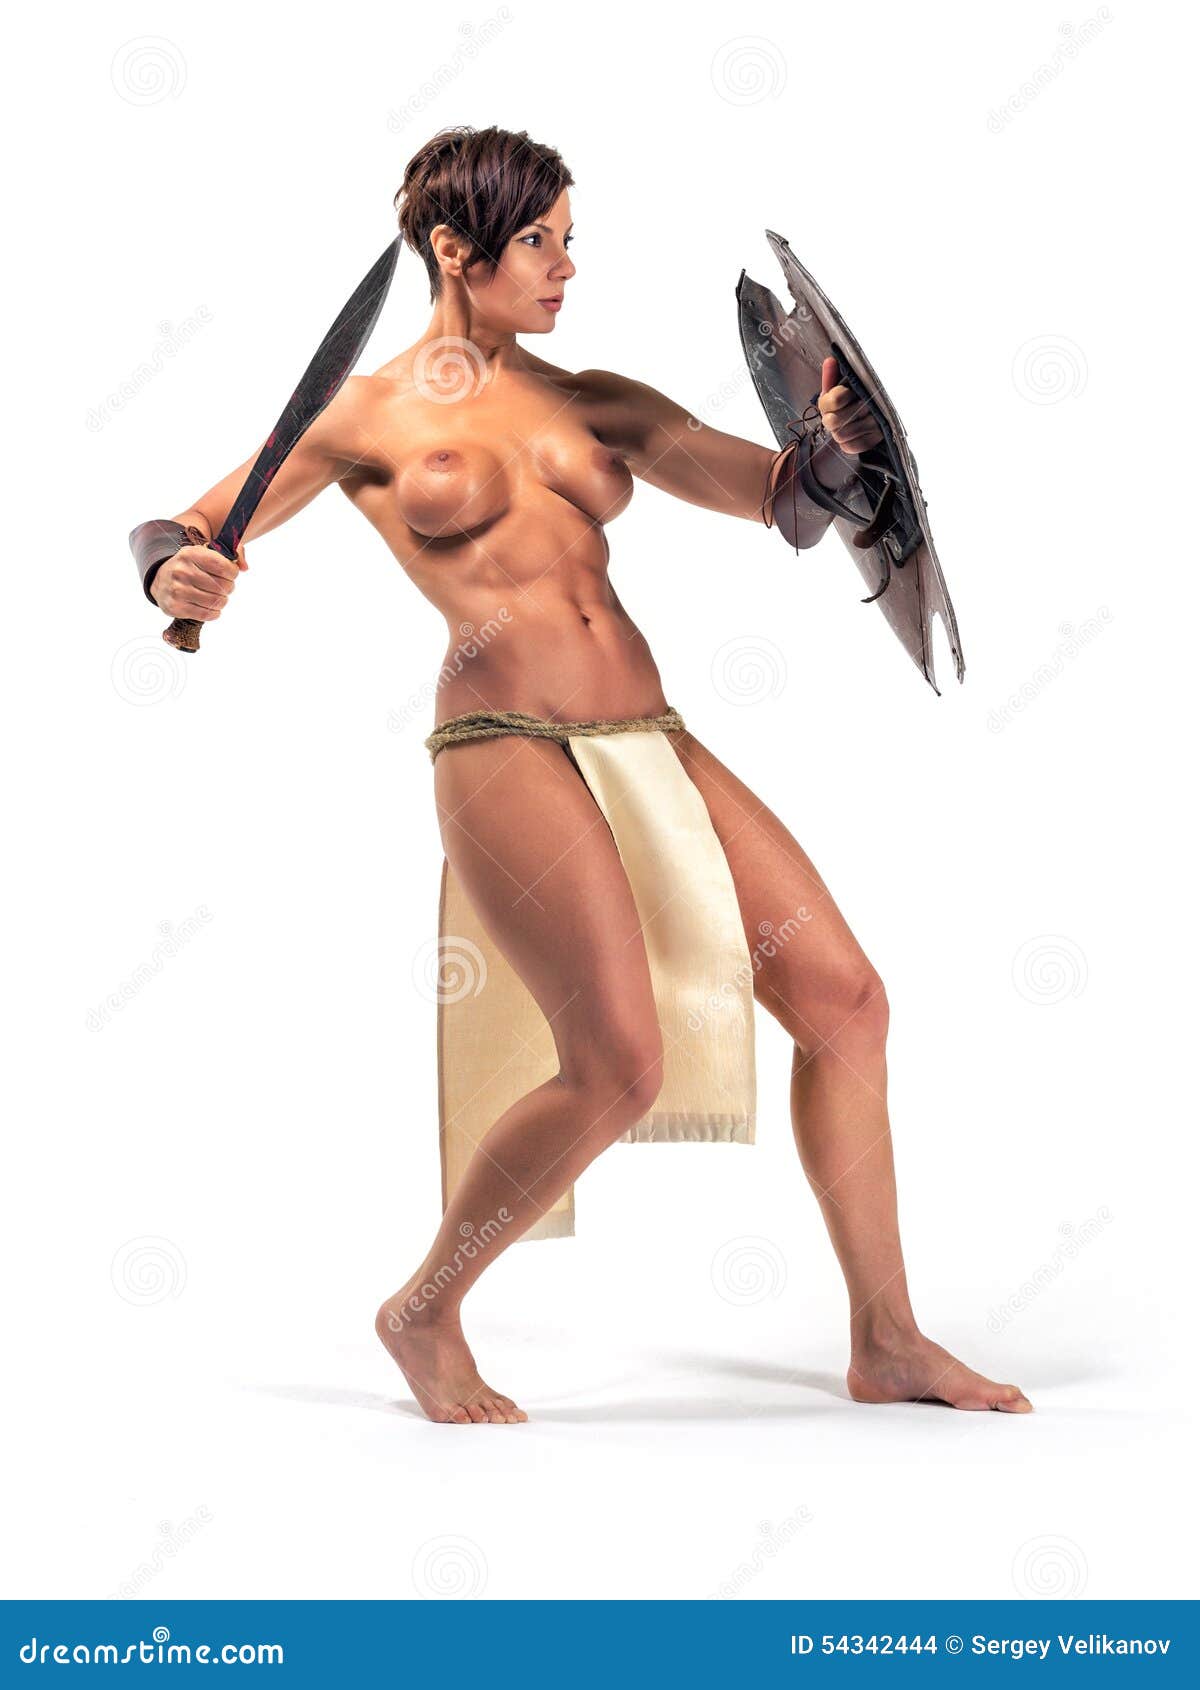 davy mitchell recommends nude warrior women pic